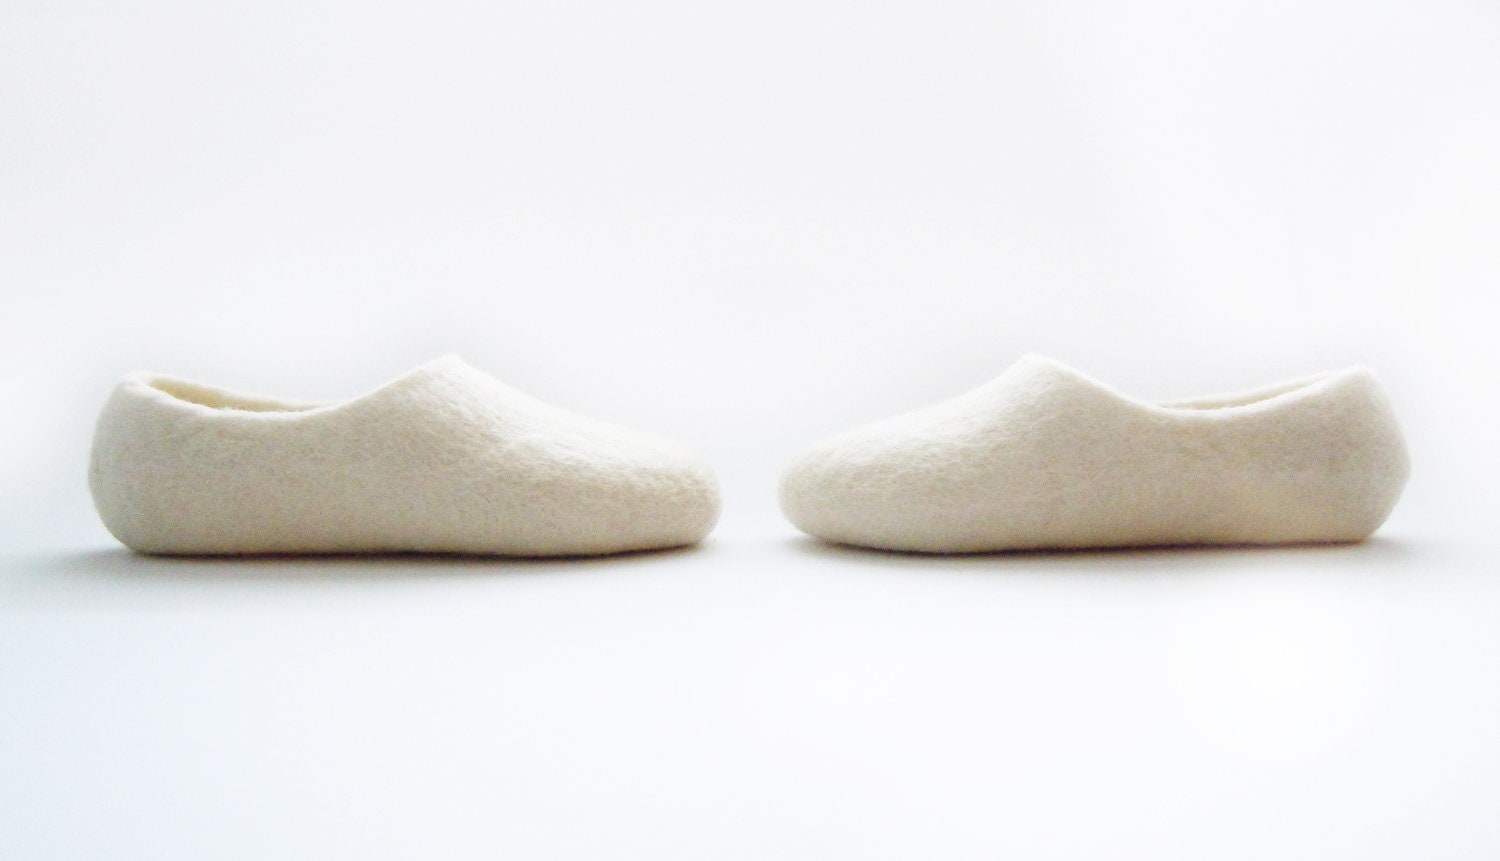 Simple felted kid size slippers